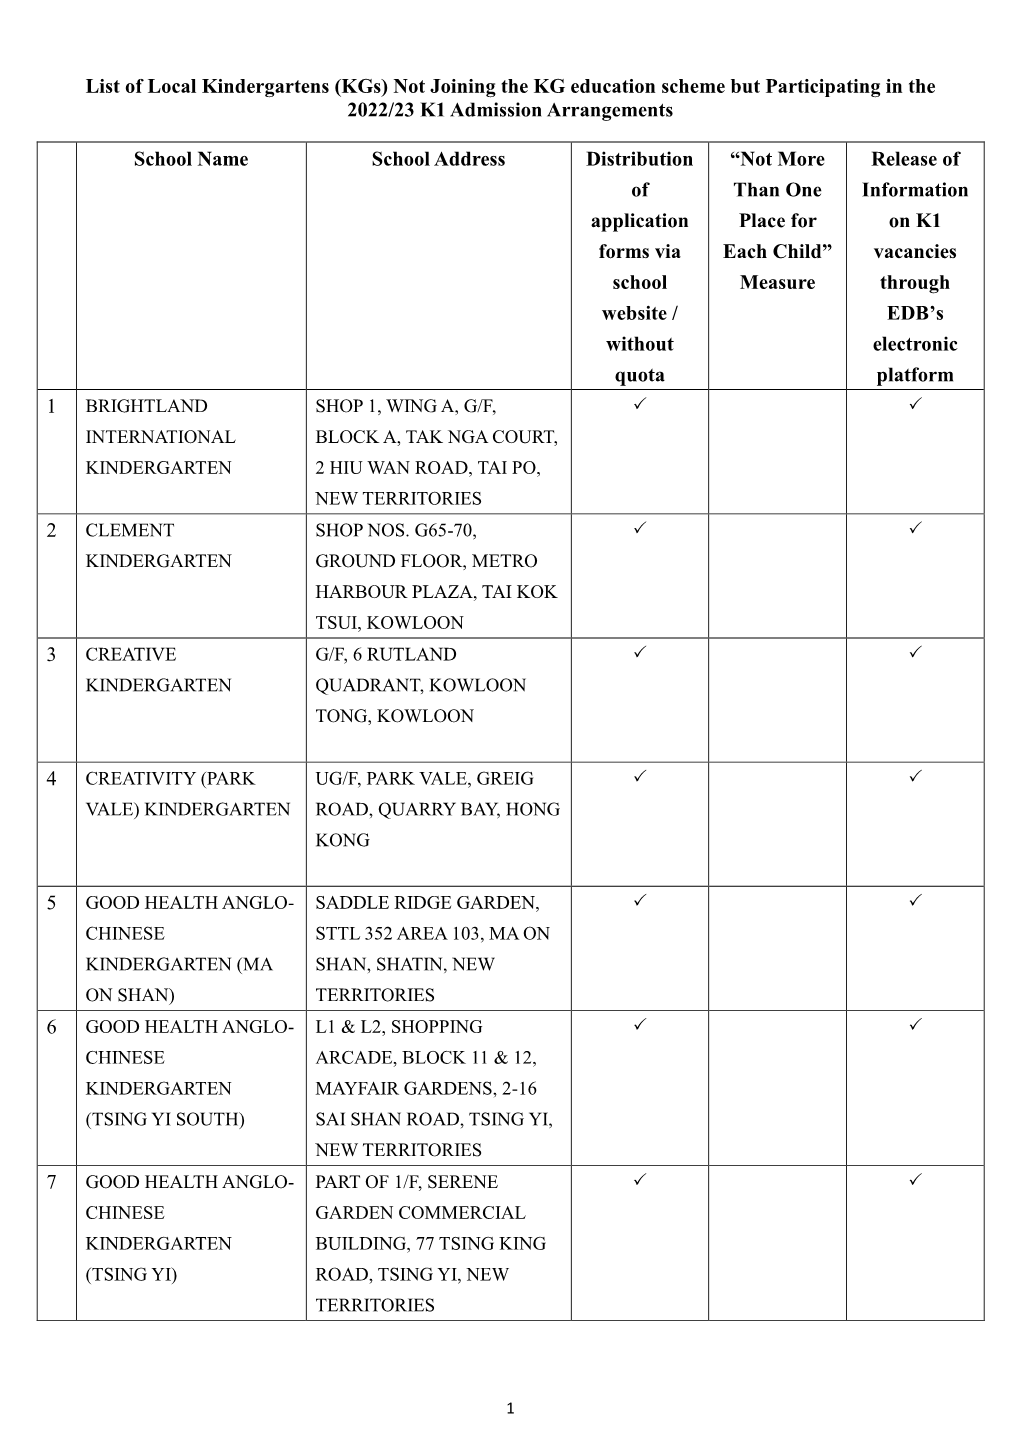 List of Local Kindergartens (Kgs) Not Joining the KG Education Scheme but Participating in the 2022/23 K1 Admission Arrangements